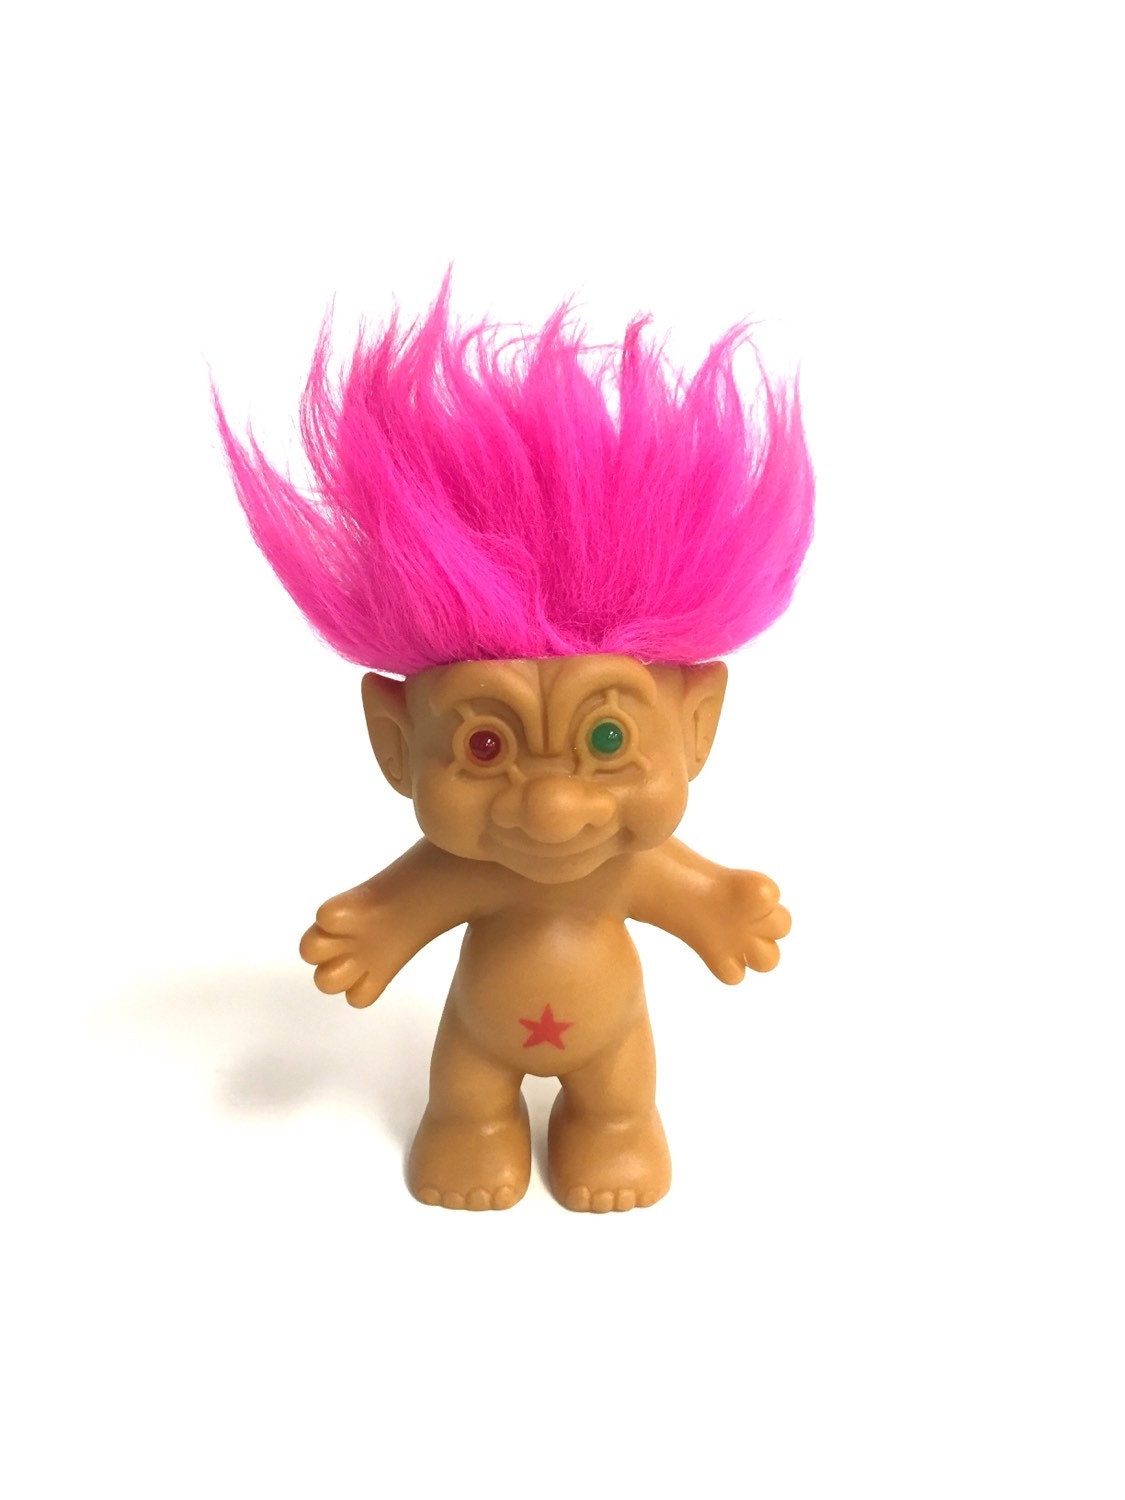 Vintage 80s troll doll pink hair two different colored eyes